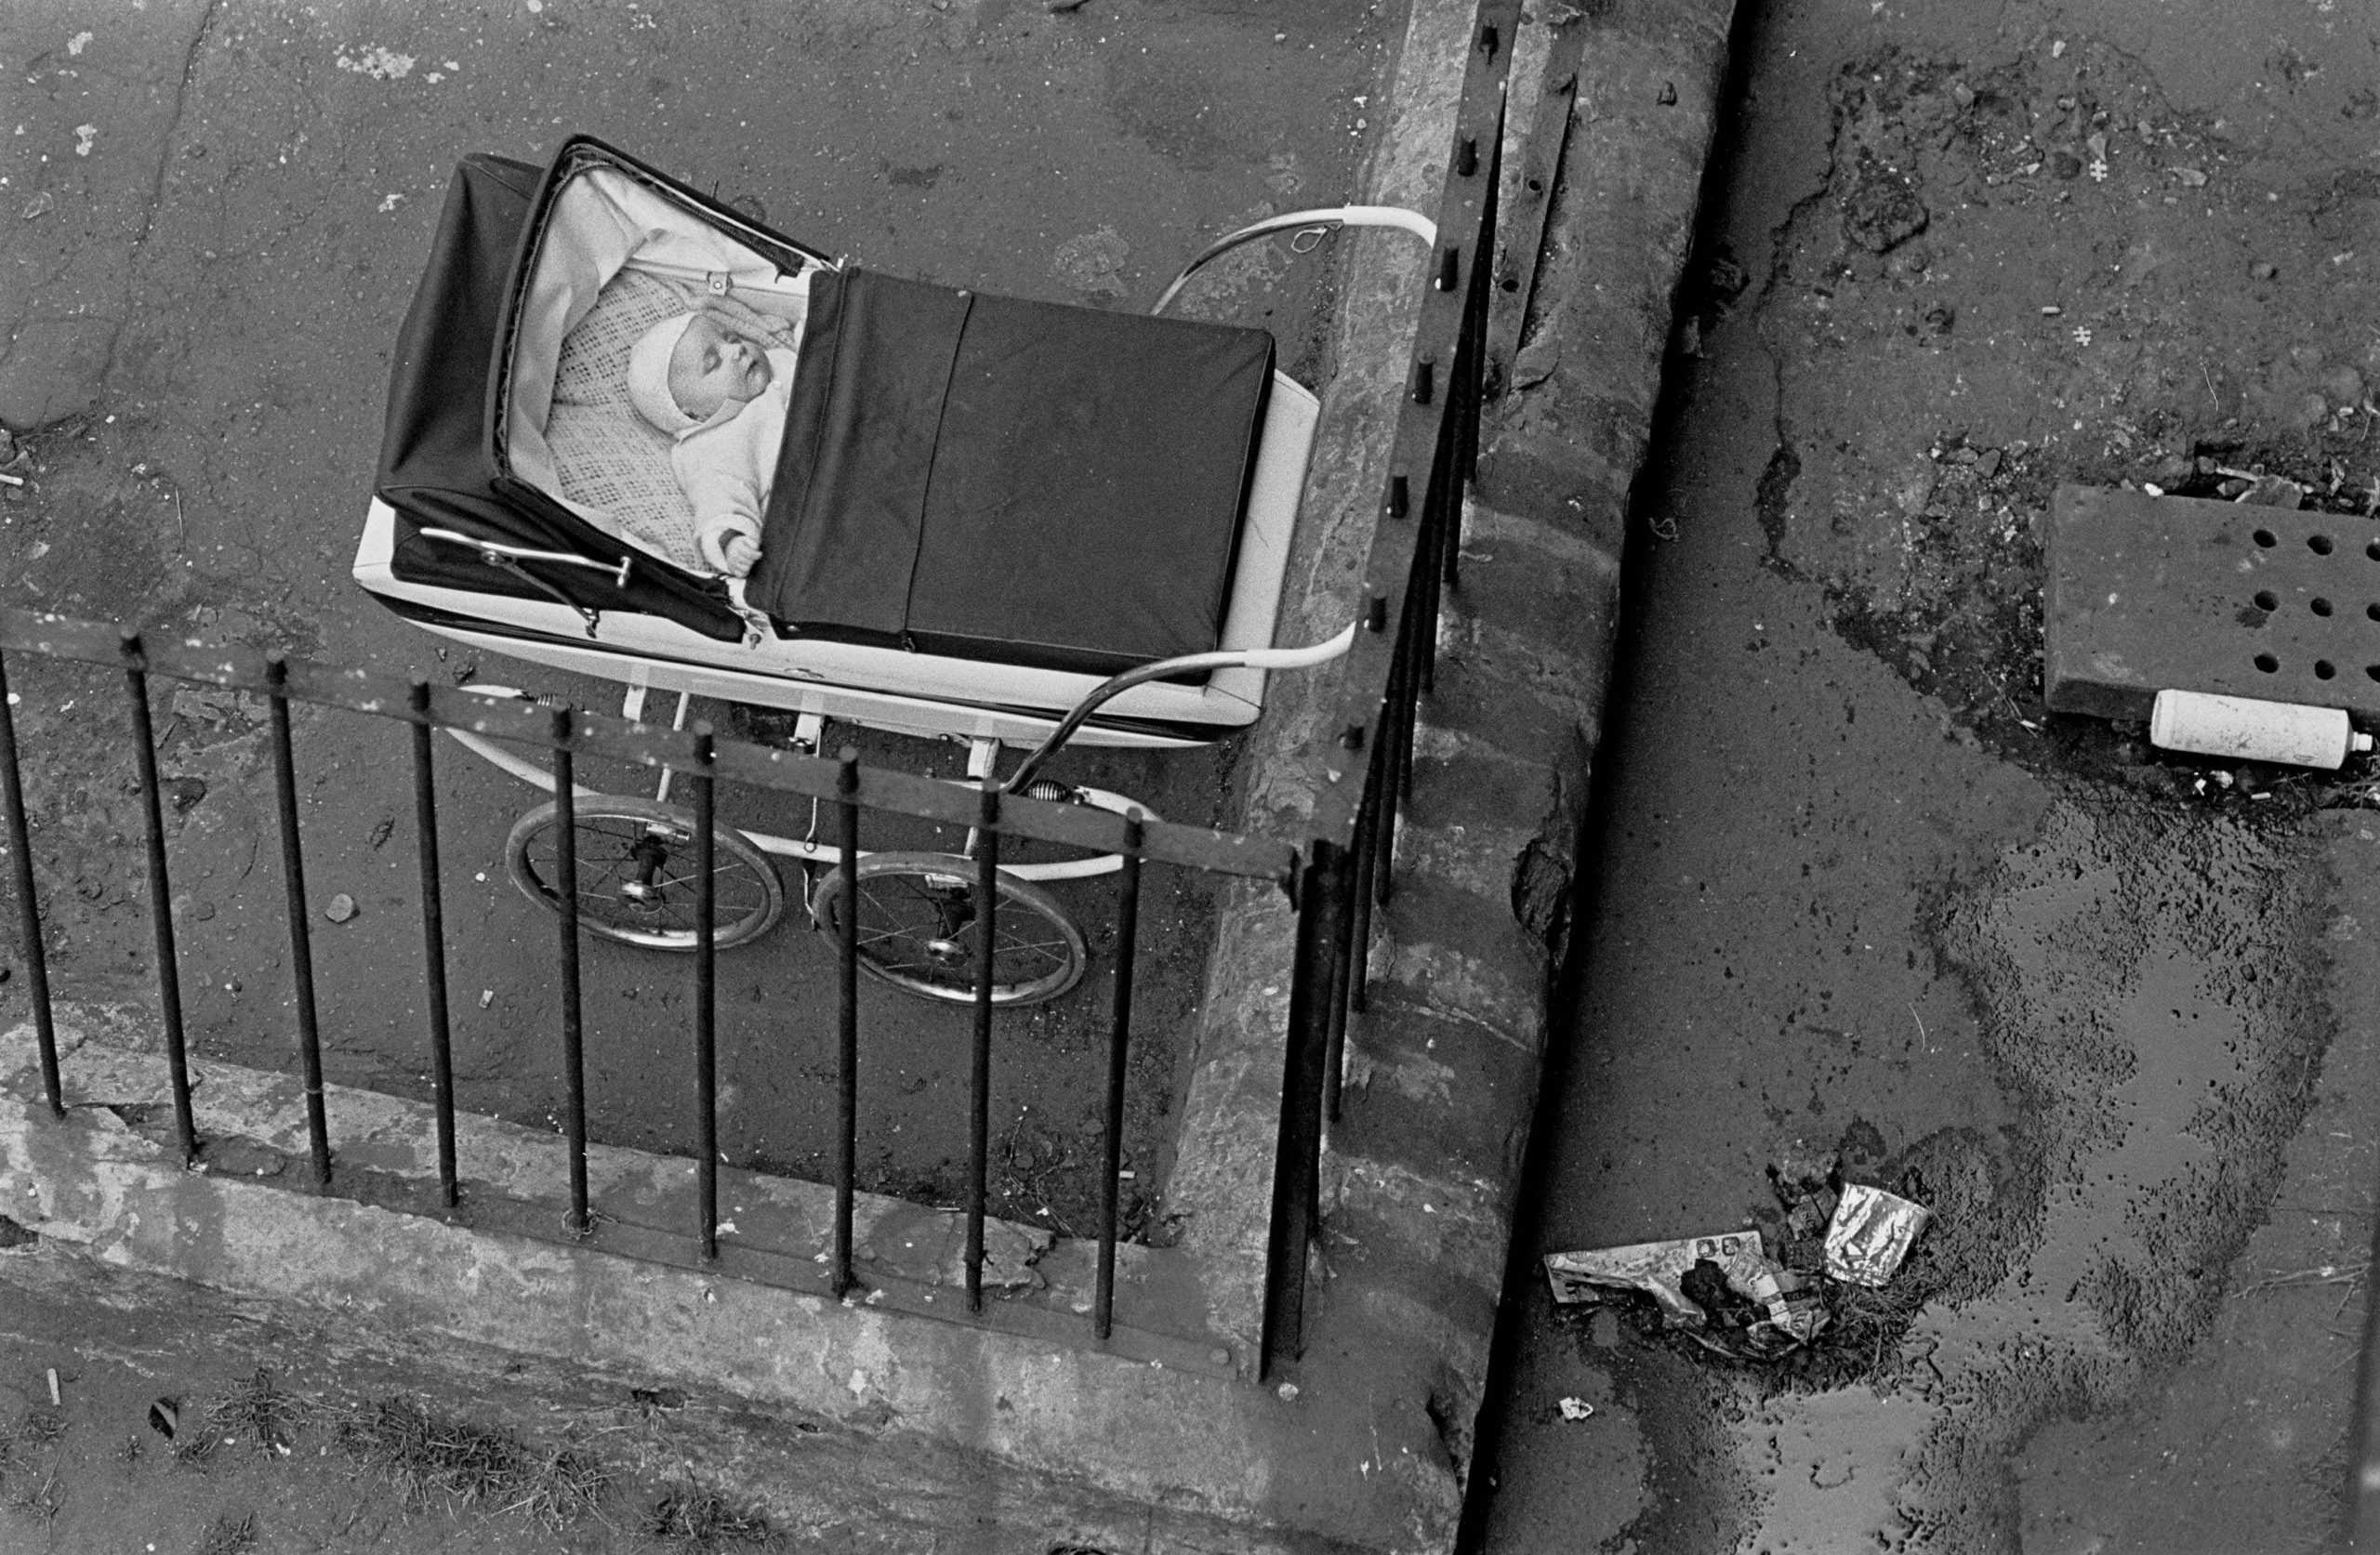 Baby sleeping by the drains in a tenement courtyard Glasgow Maryhill 1971